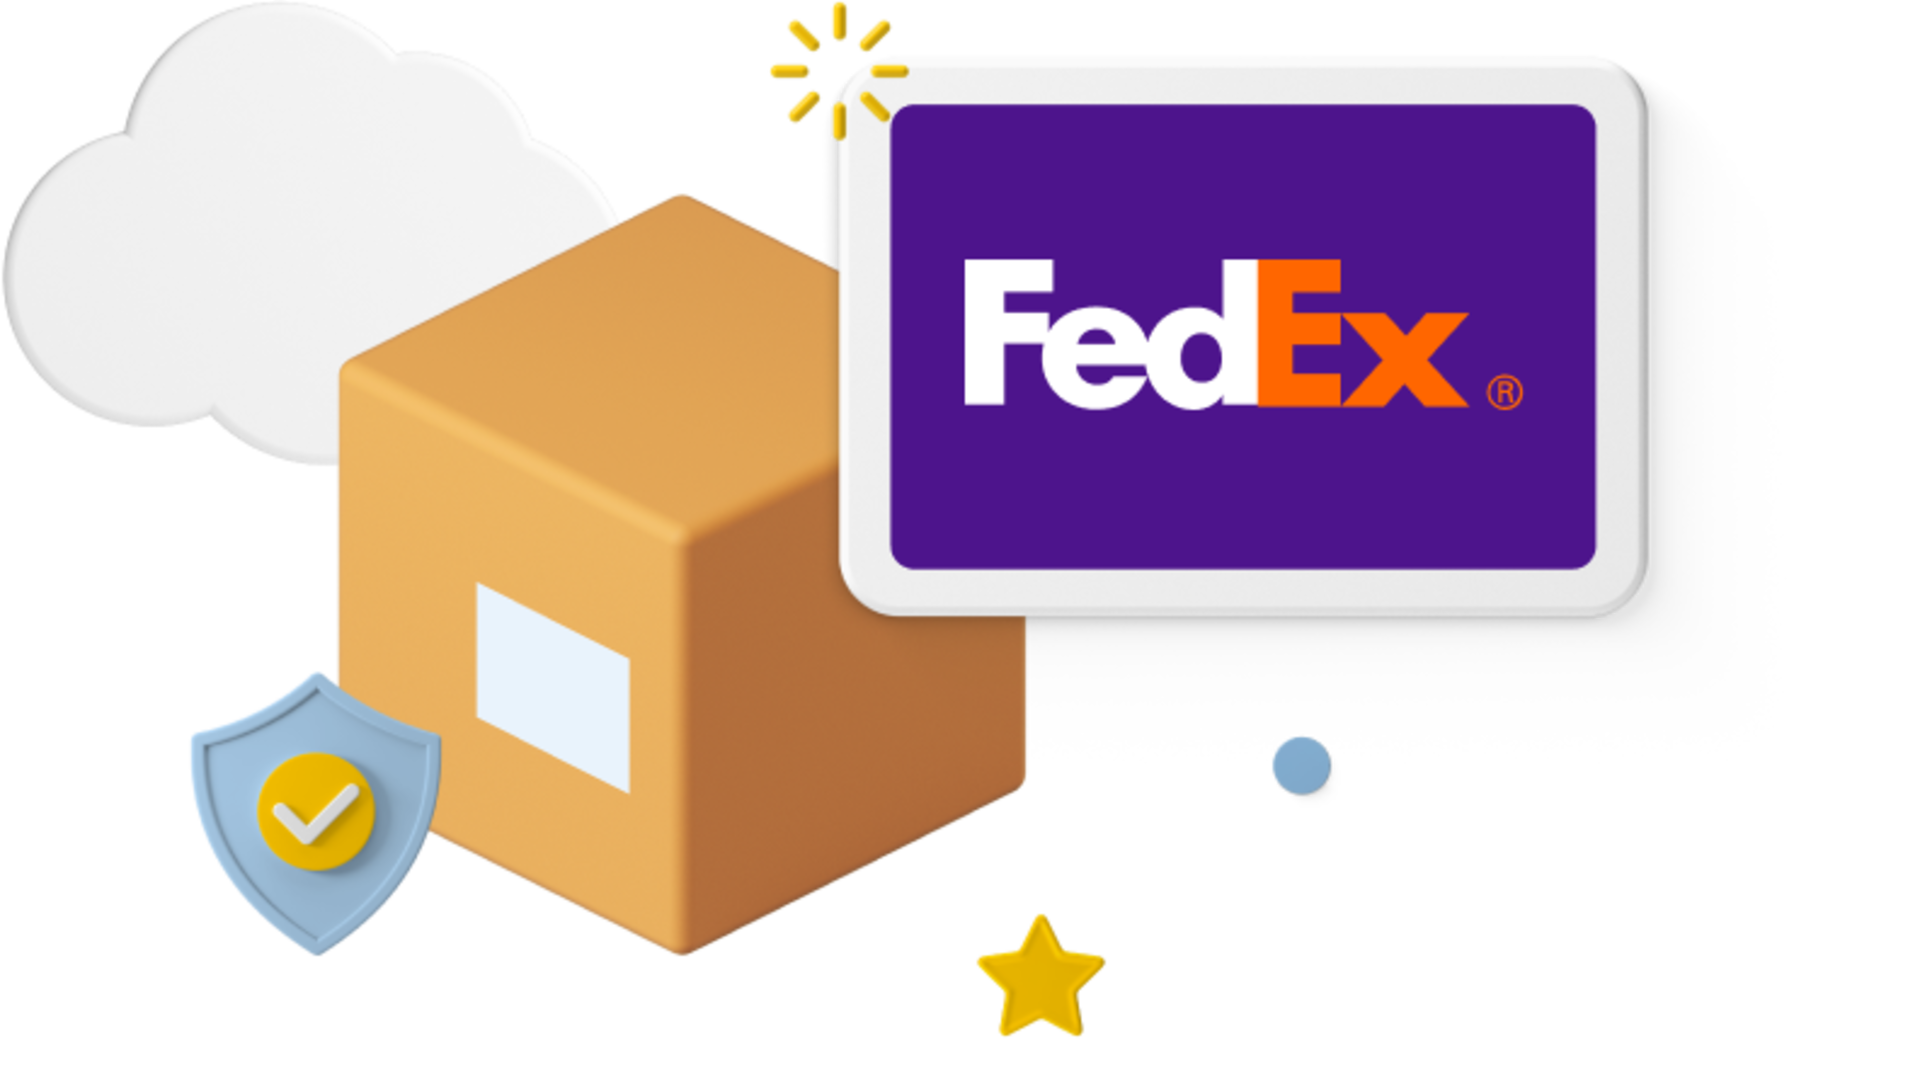 Box with FedEx logo in the top right